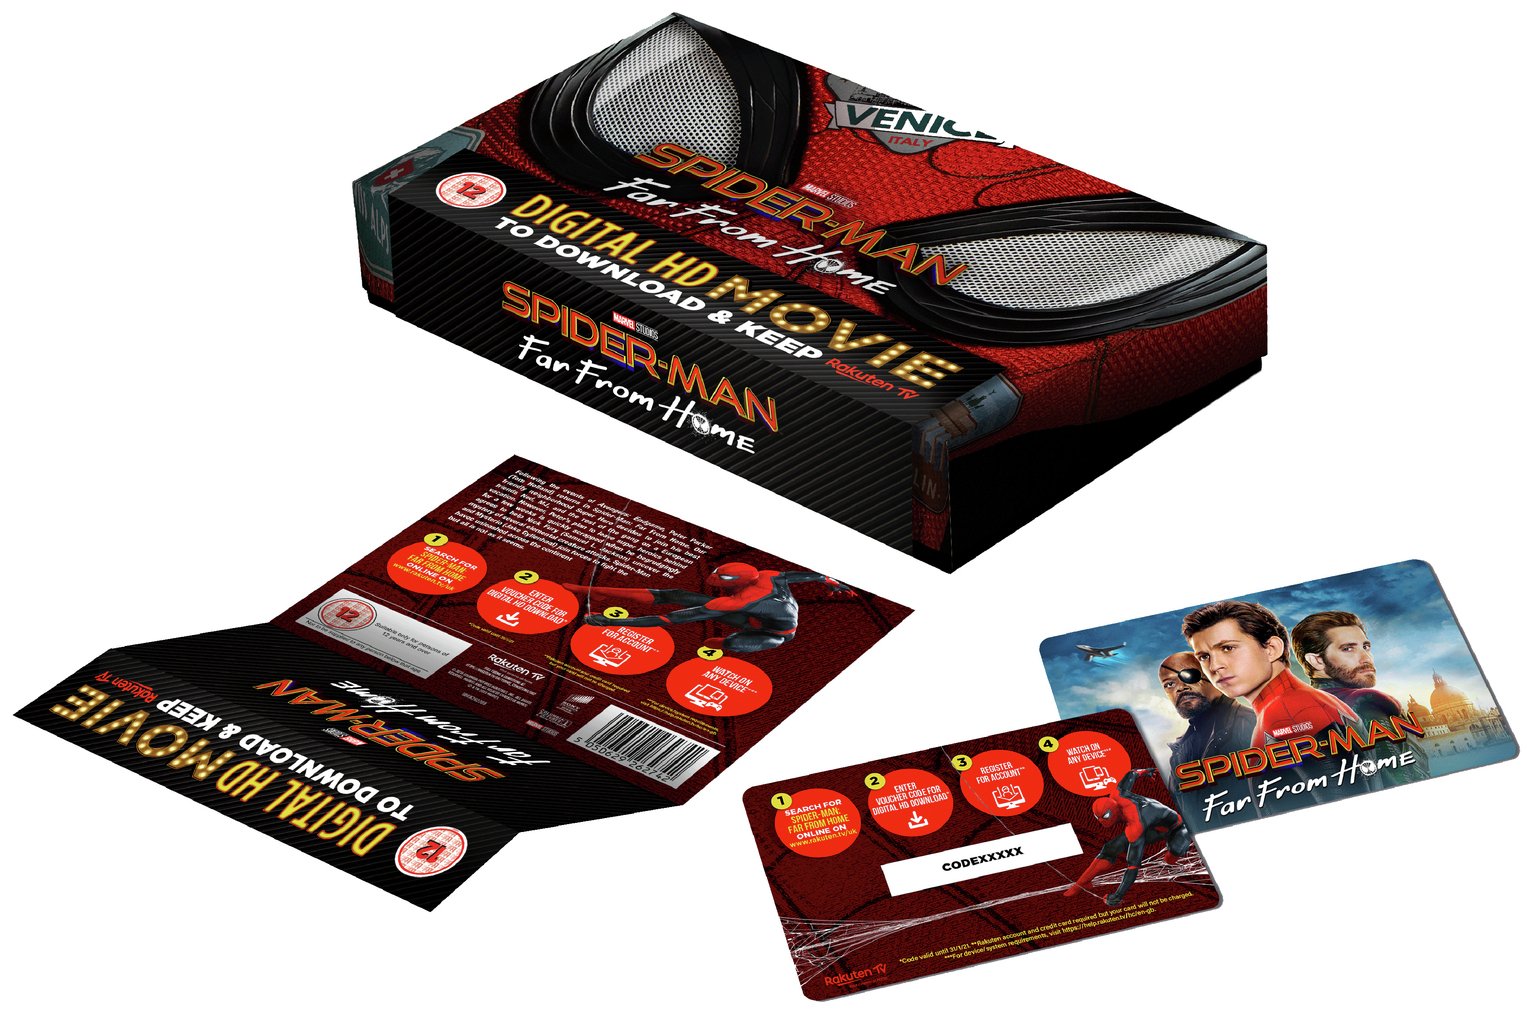 Spider-Man: Far From Home Digital Movie Download Review